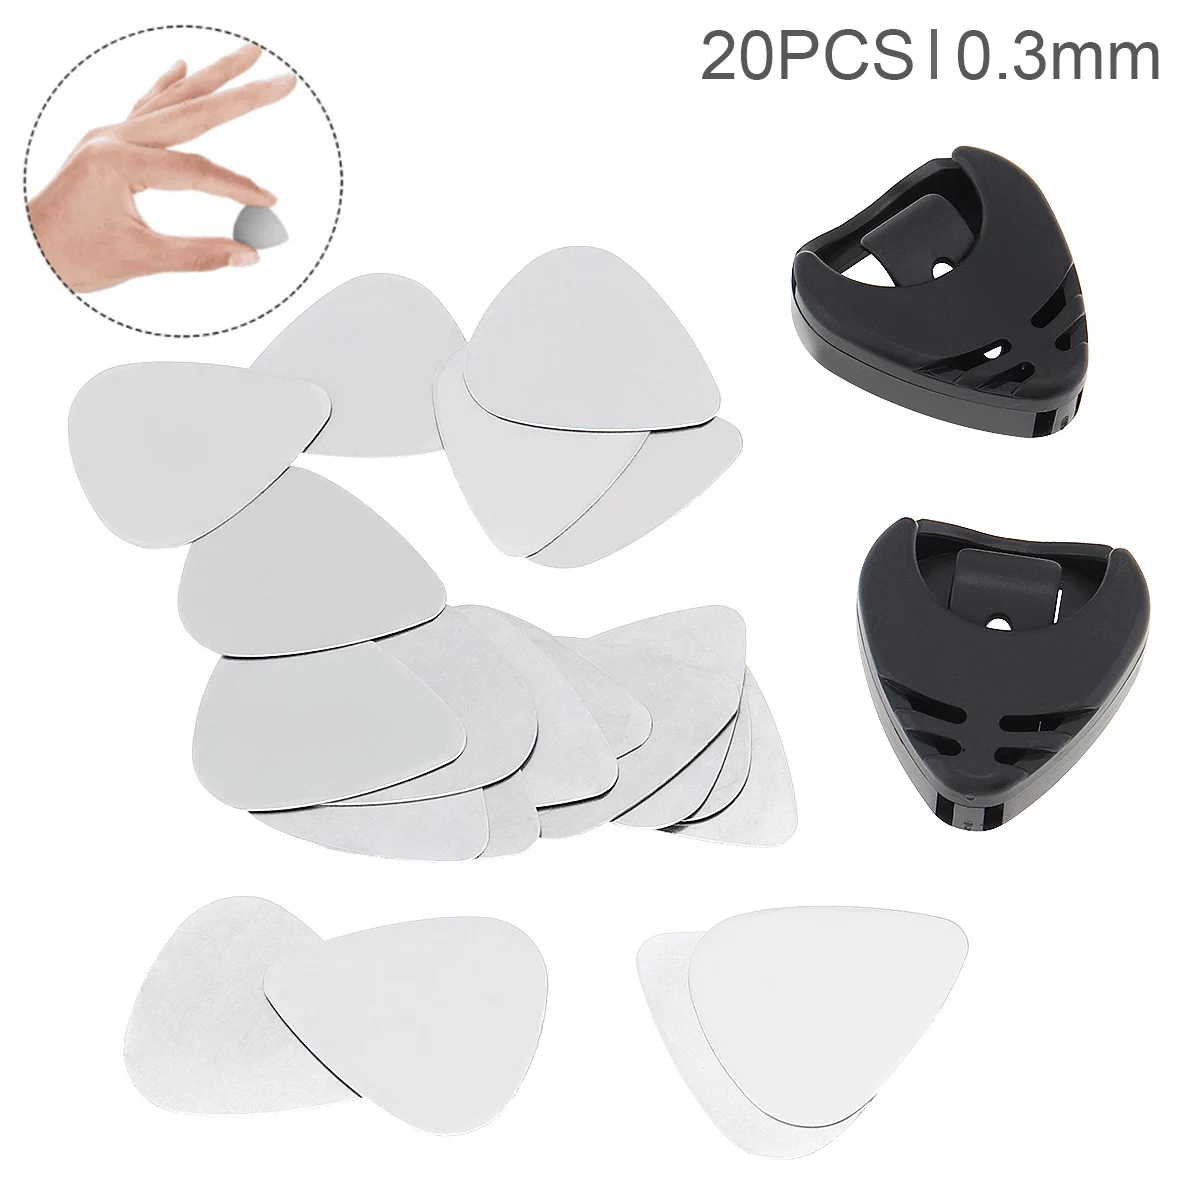 20pcs Guitar Picks Stainless Steel 0.3mm Electric Guitar Bass Plectrum with 2 Pick Holders Musical Instruments Accessories